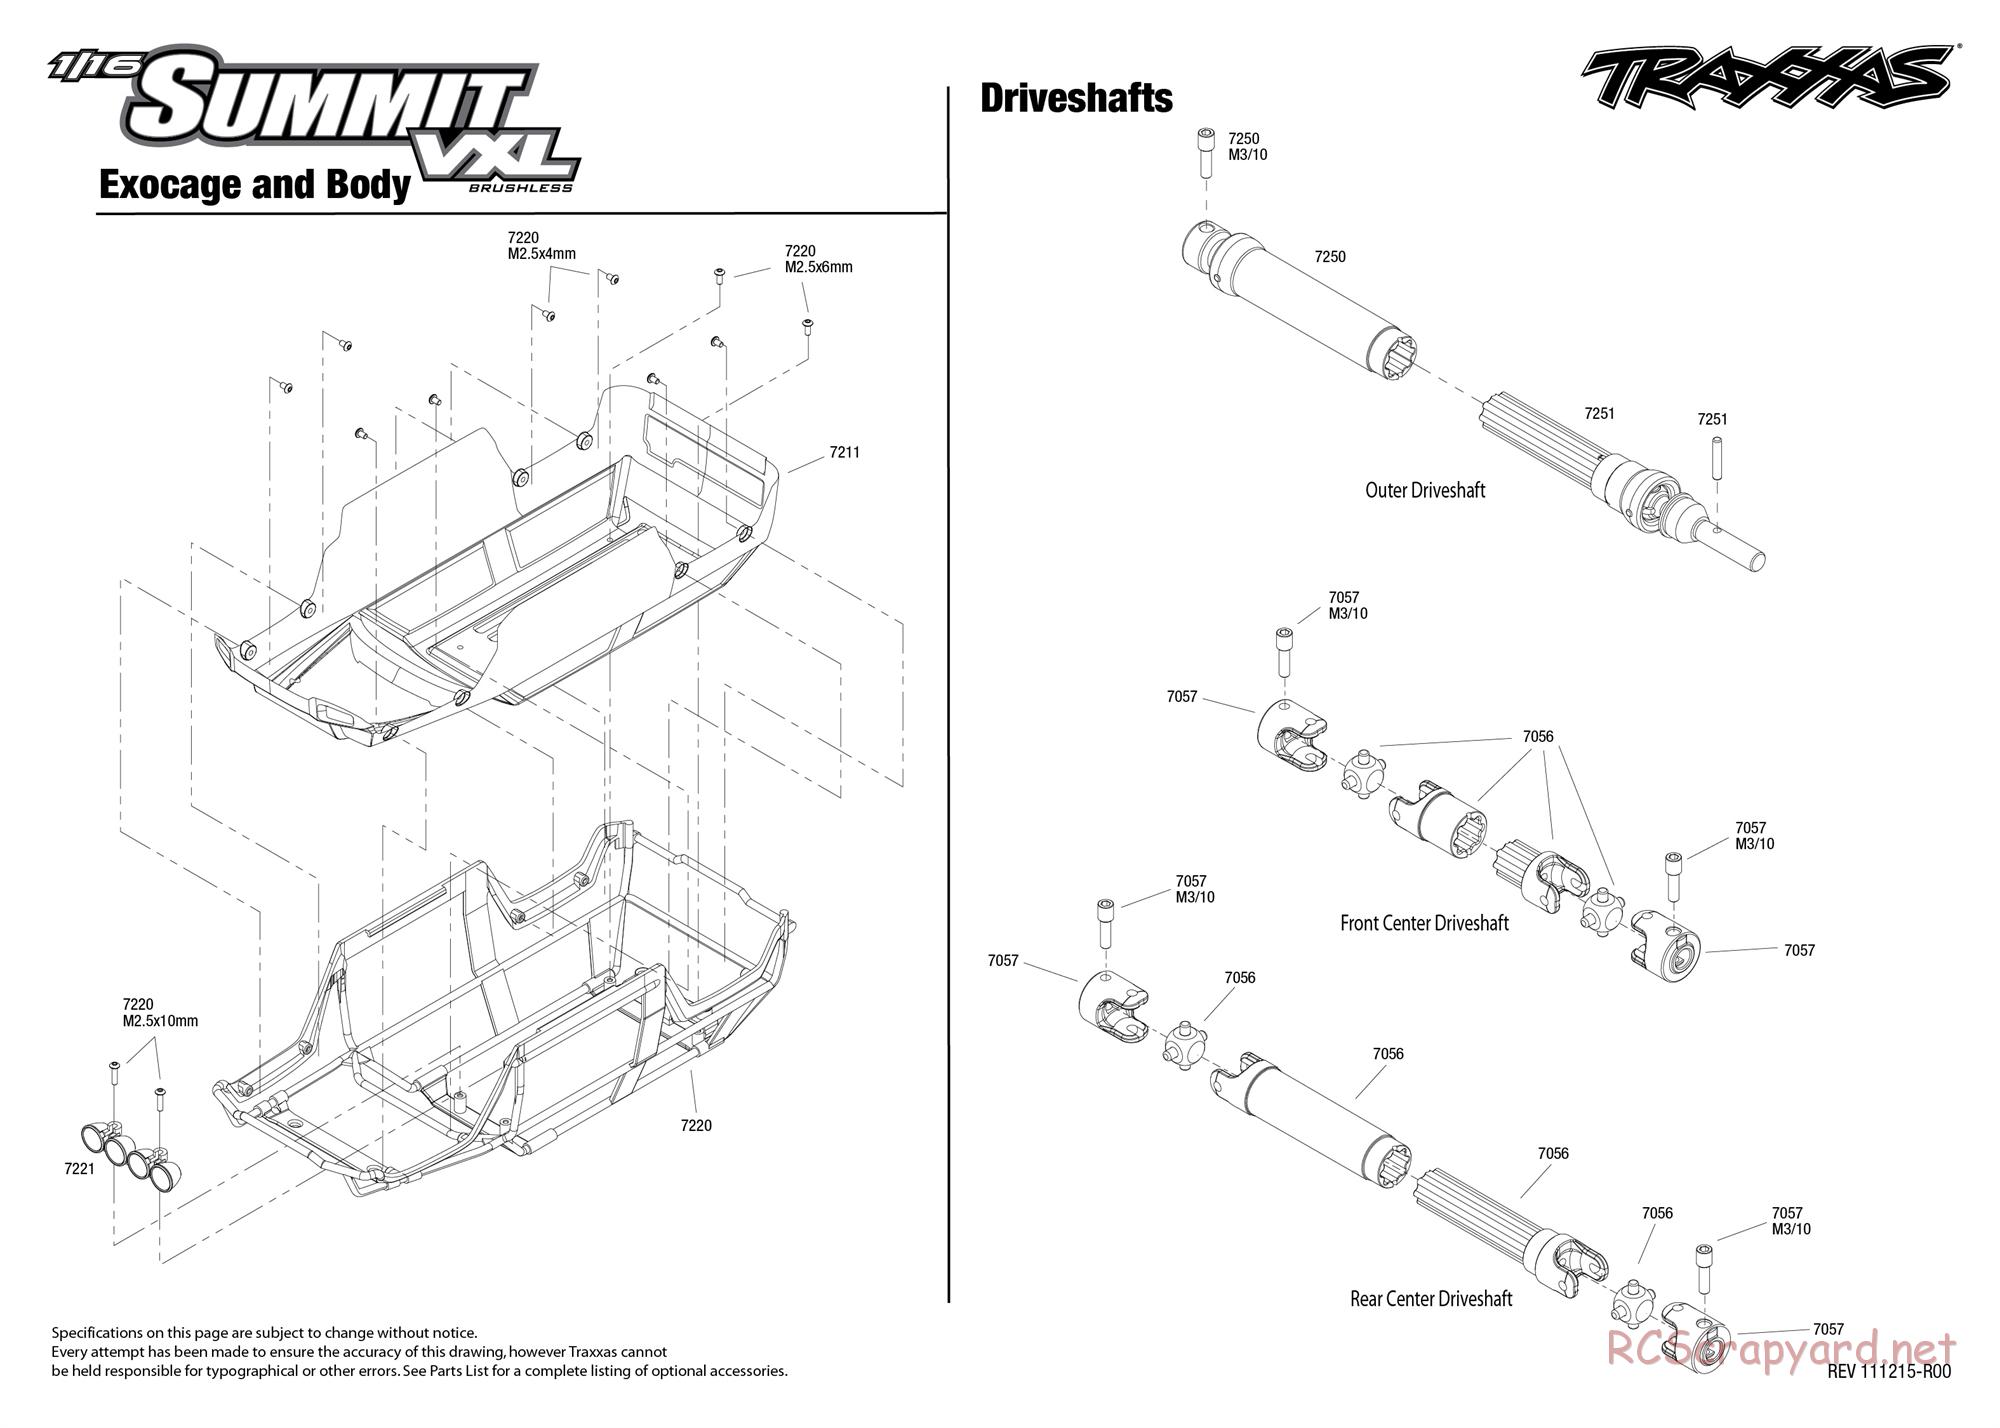 Traxxas - 1/16 Summit VXL (2010) - Exploded Views - Page 2